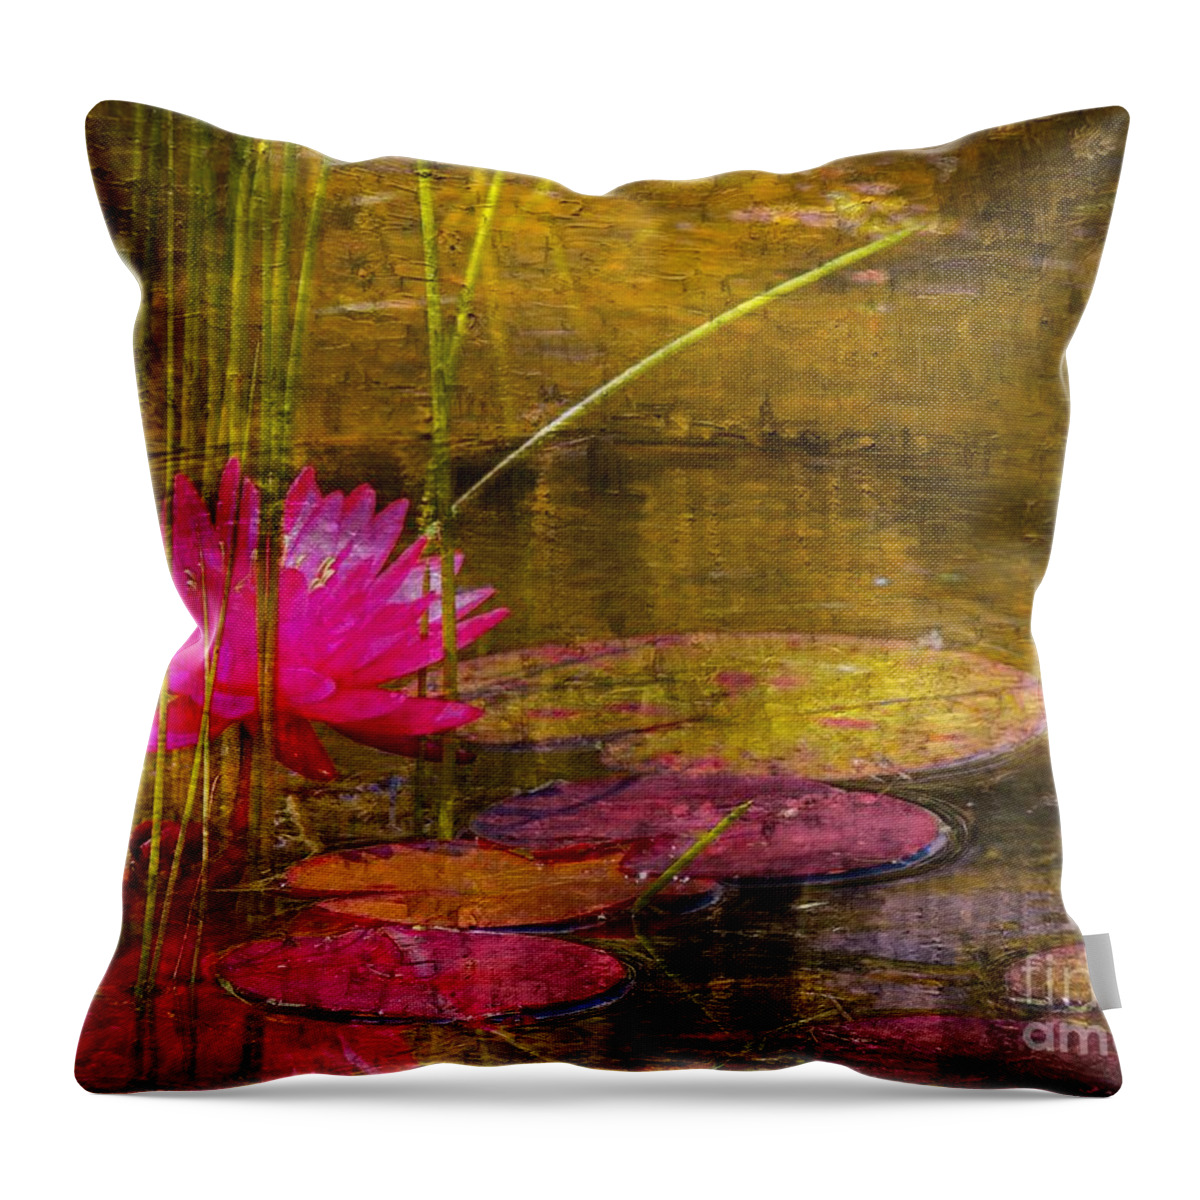 Marcia Lee Jones Throw Pillow featuring the photograph Lily Pond by Marcia Lee Jones